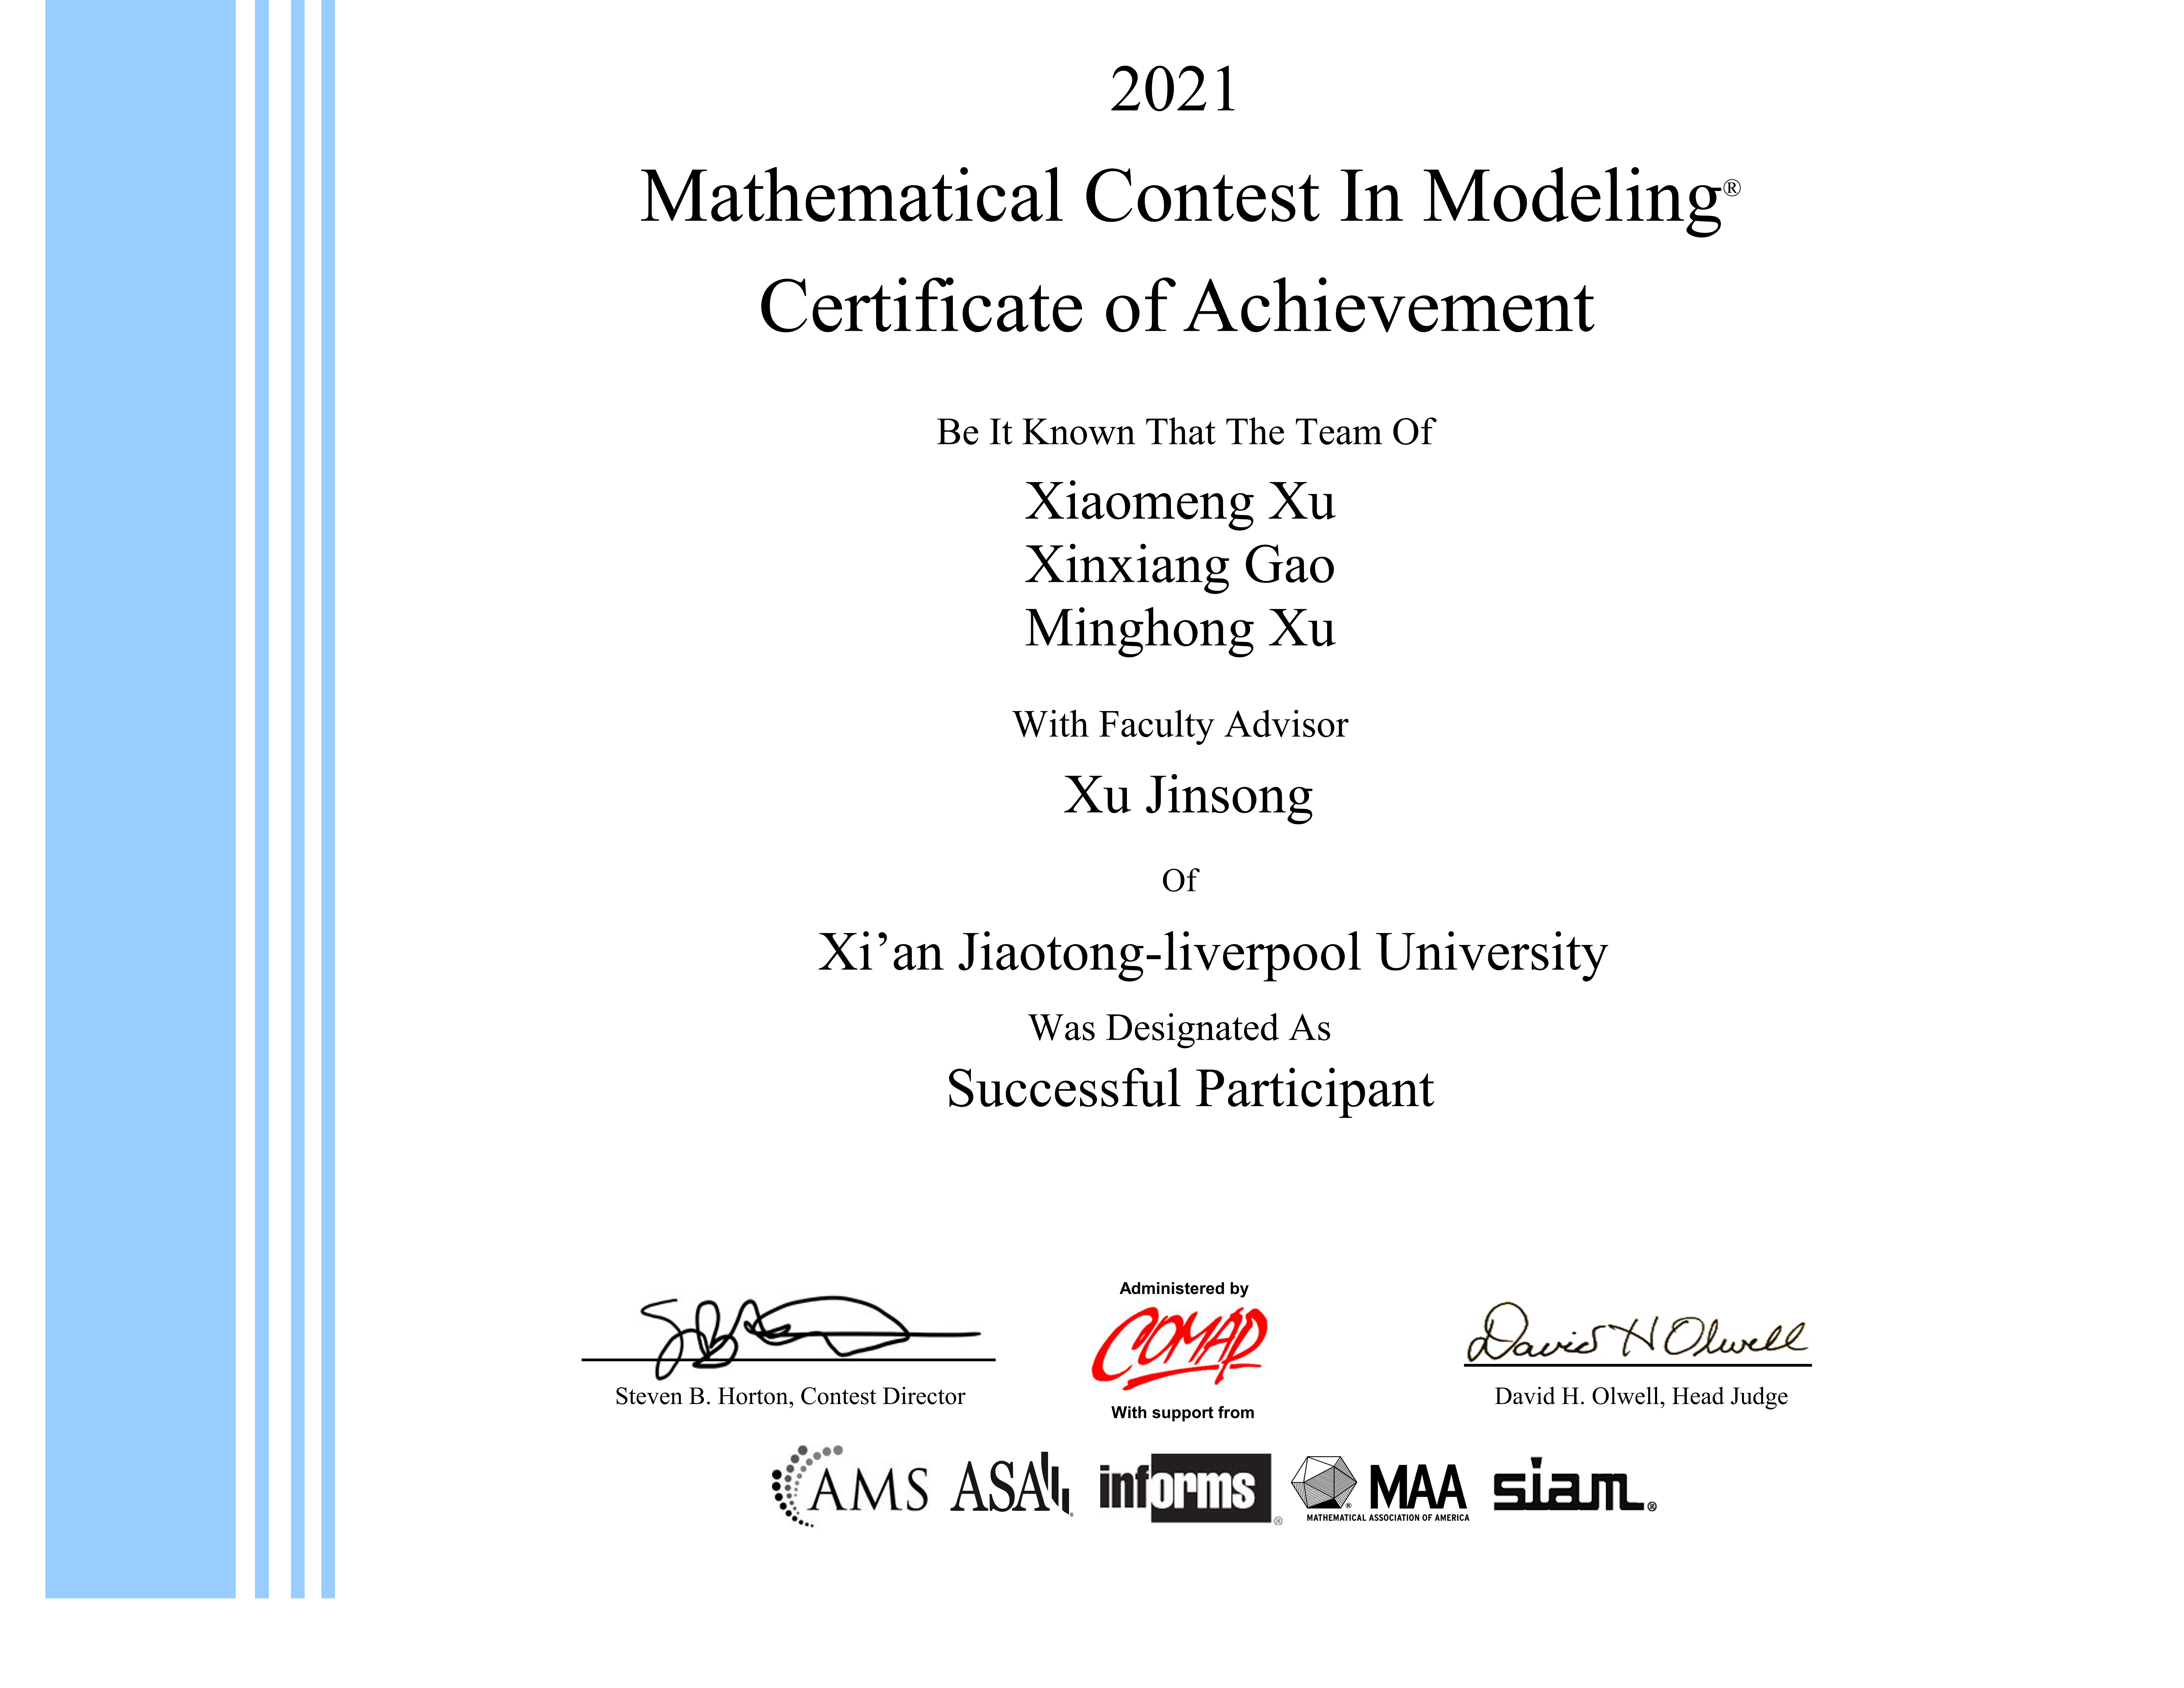 Certificate of Mathematical Contest in Modeling 2021